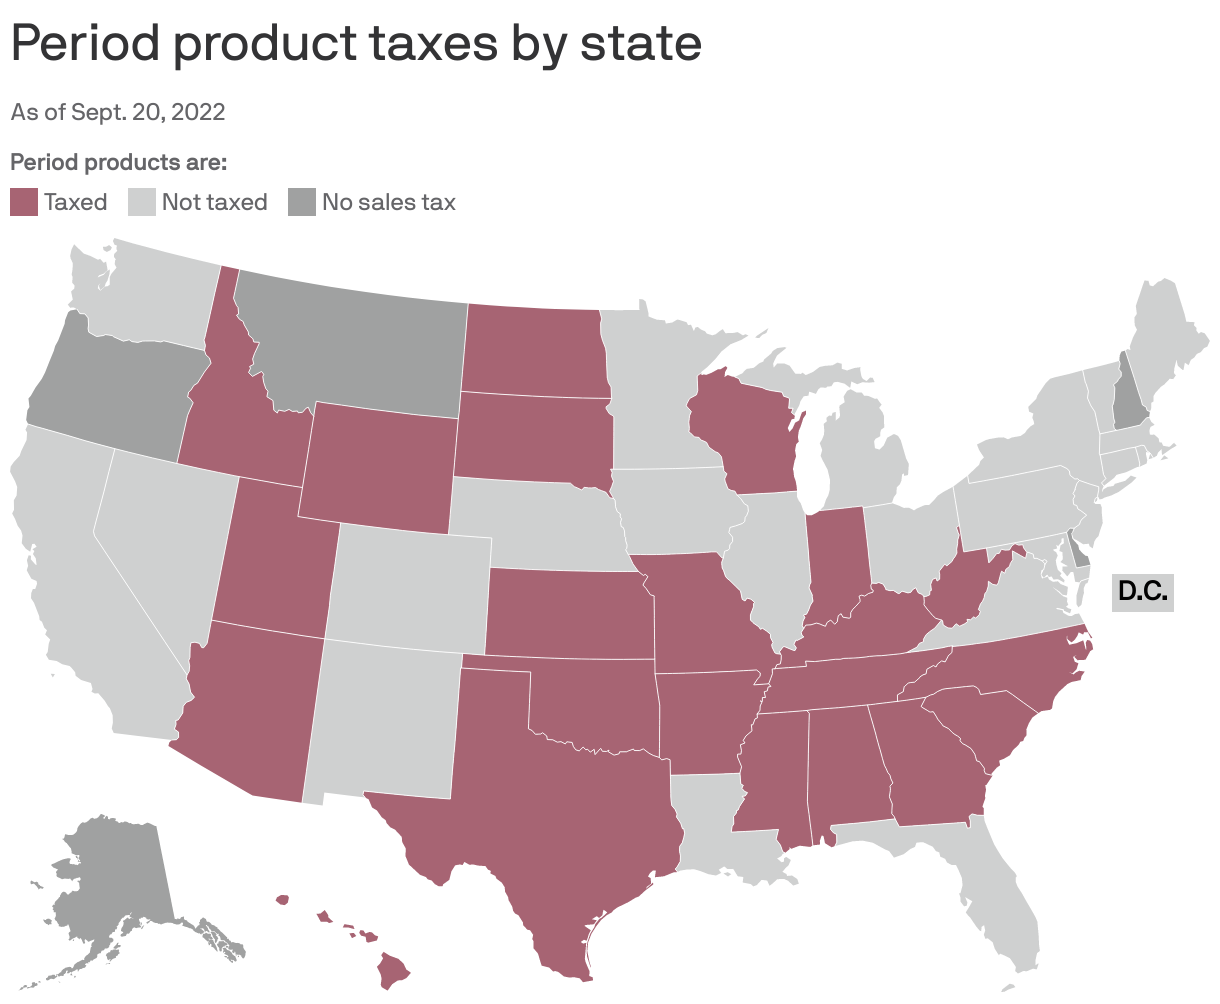 Period product taxes by state